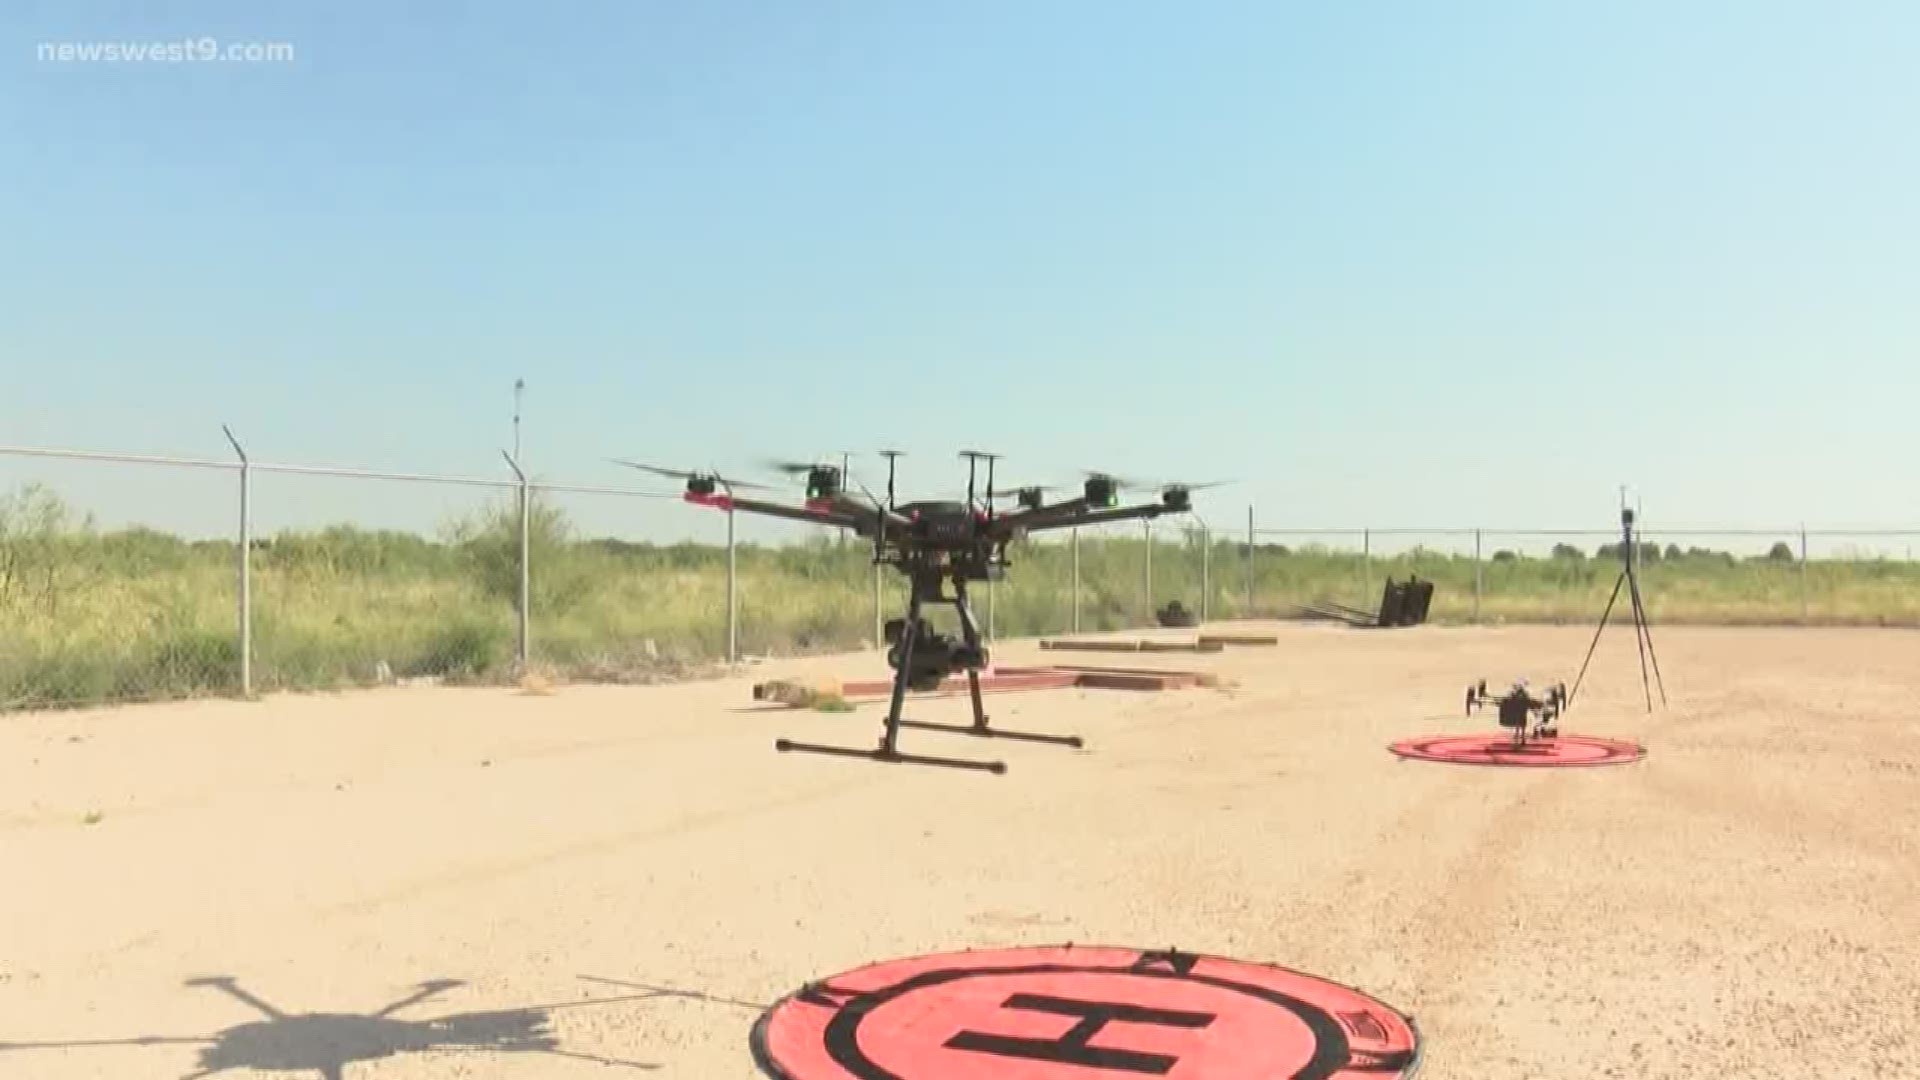 Drones with advanced cameras are streamlining services at oil sites.